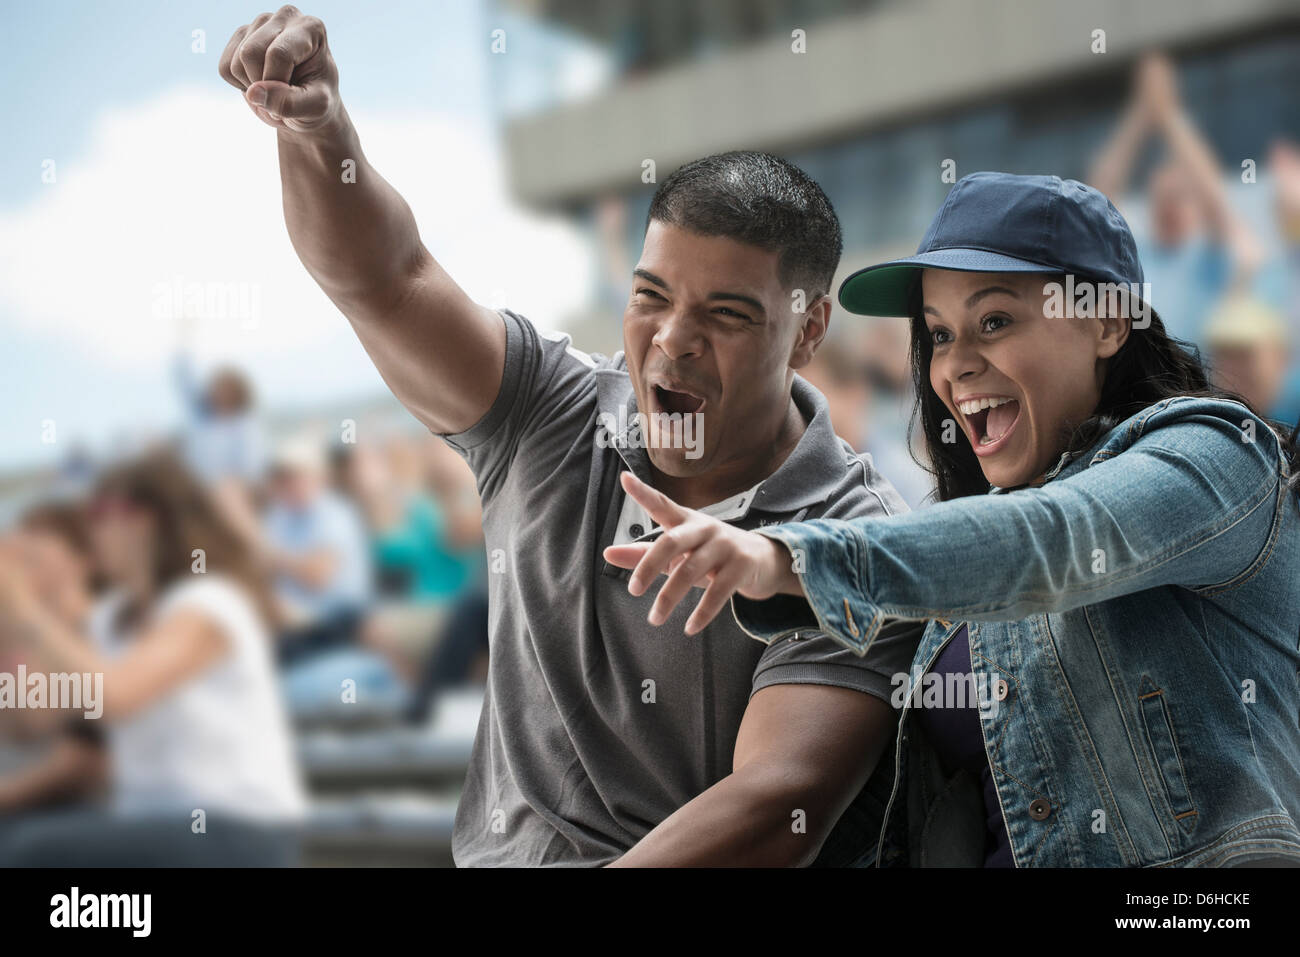 Excited couple at sports game Stock Photo